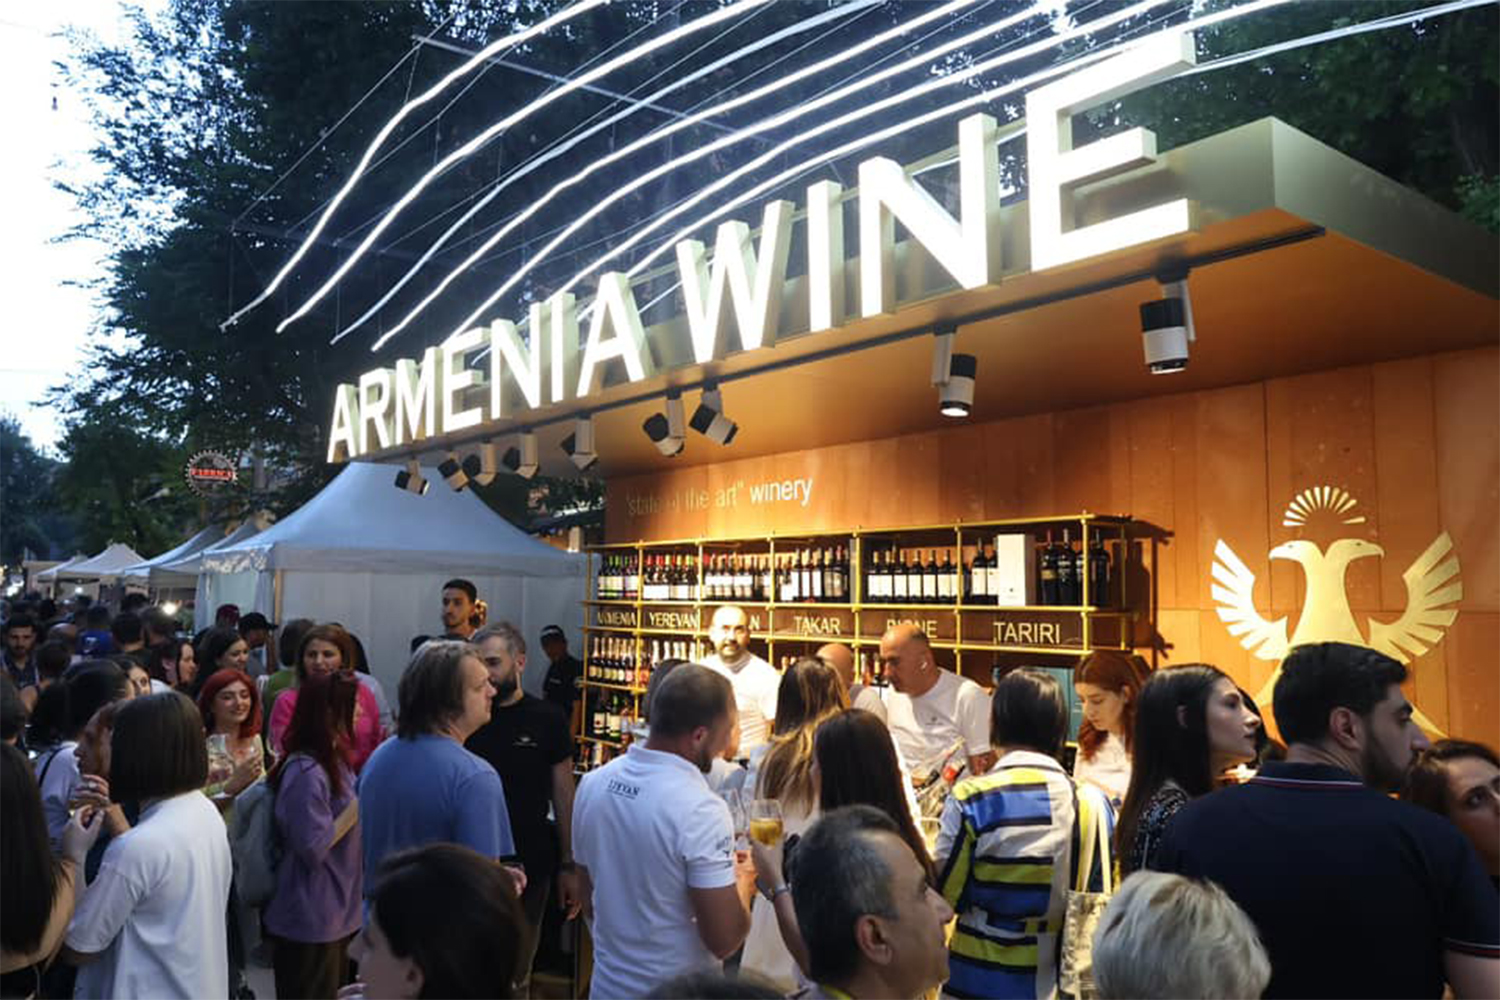 New wines, live music and the brightest colors of Armenian culture at the Armenia Wine pavilion 